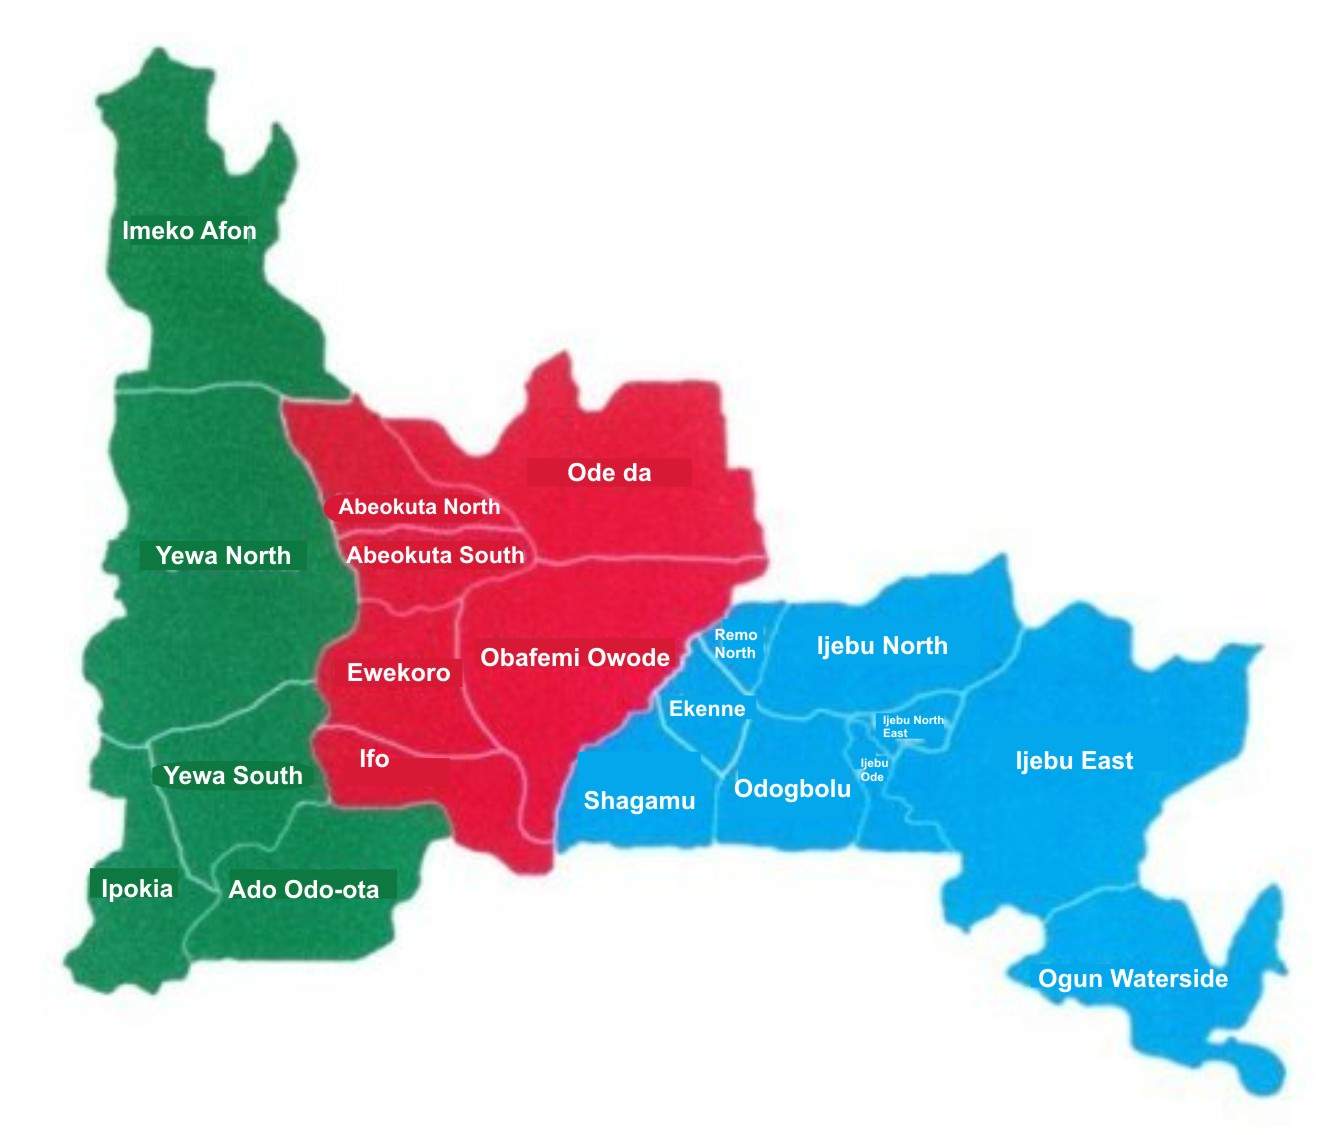 Local Governments in Ogun State